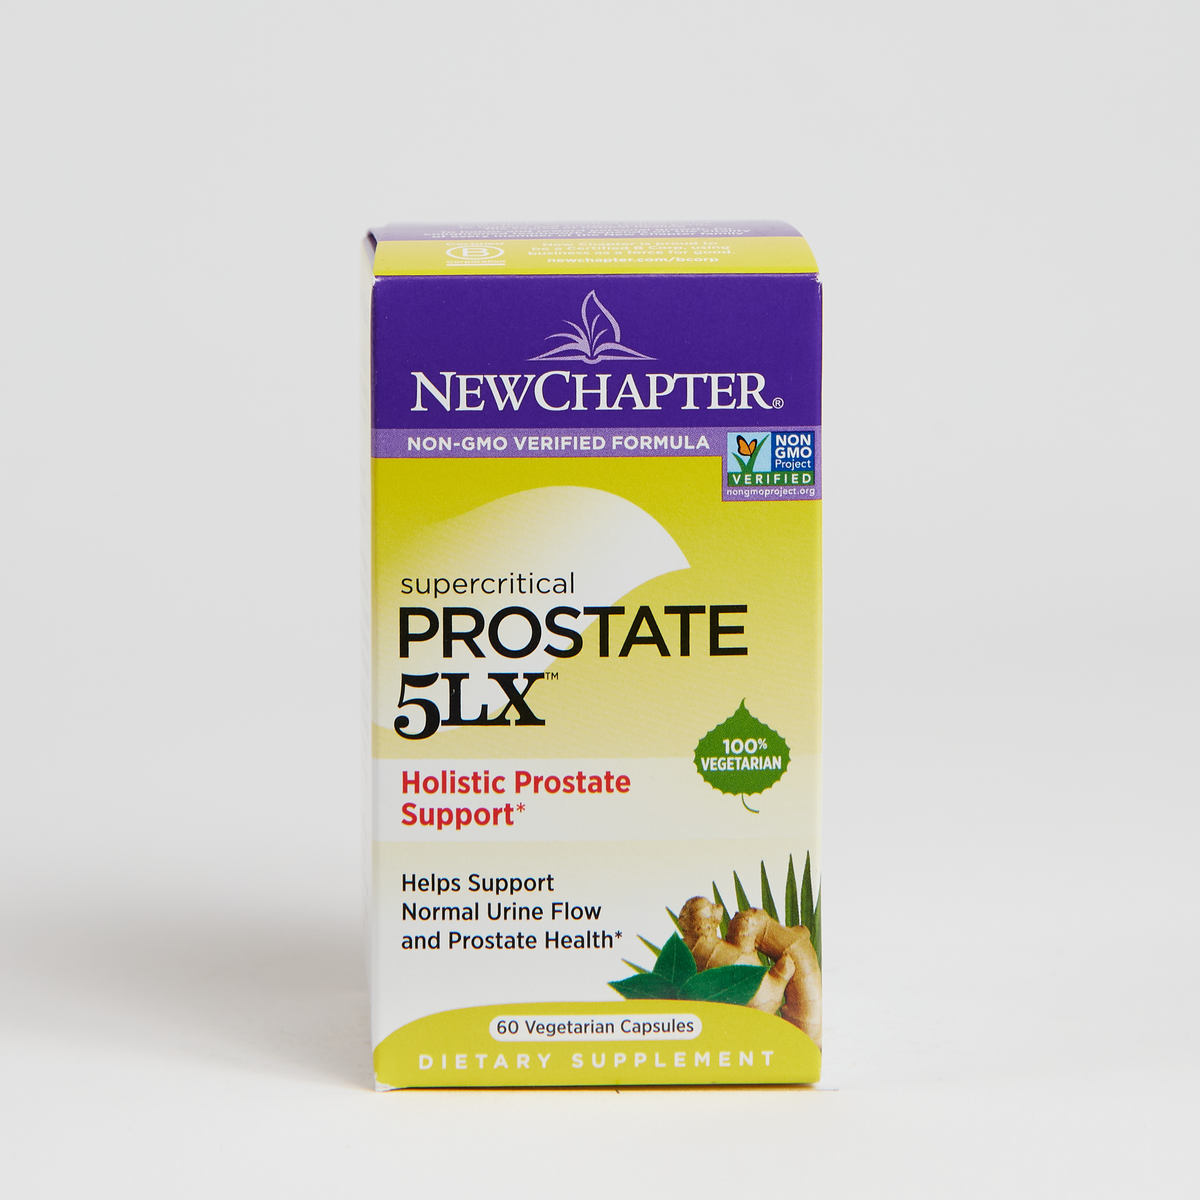 New Chapter Prostate 5LX - 60 Count